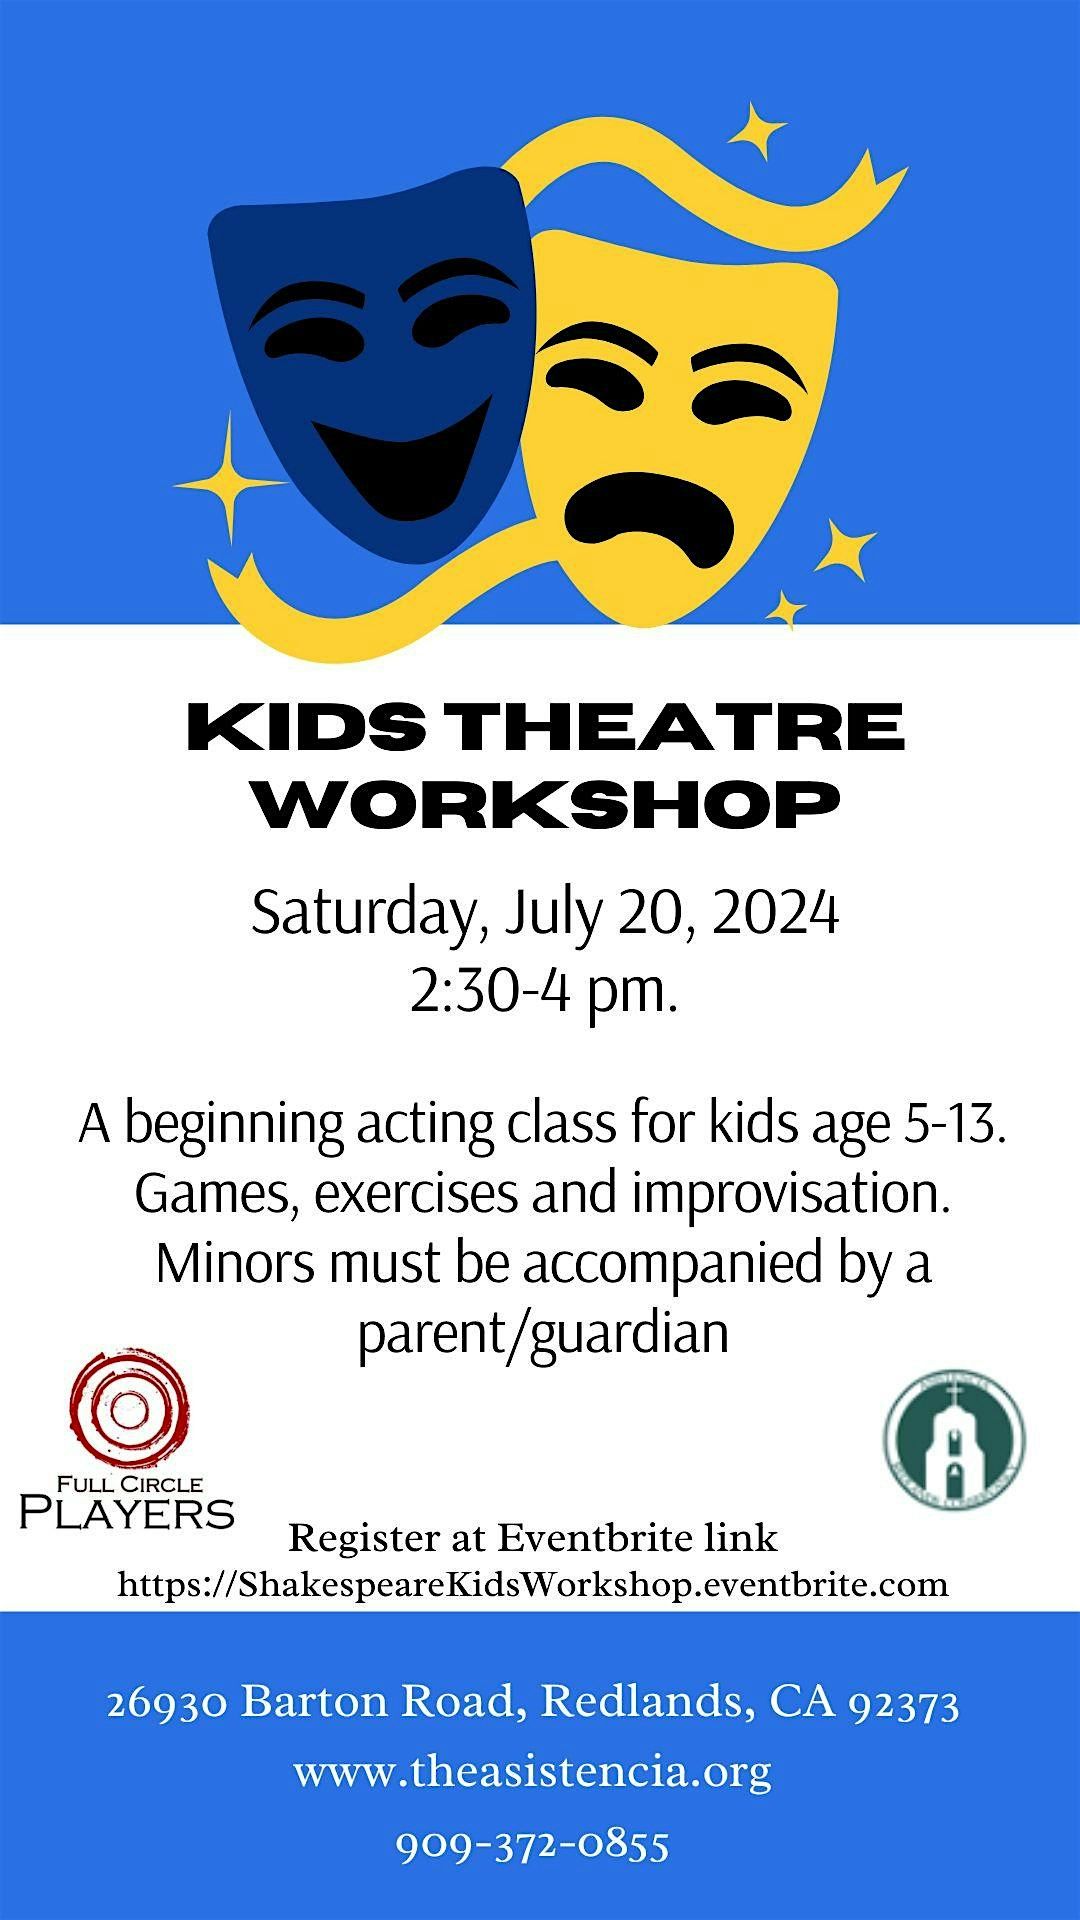 Shakespeare for Kids Theatre Workshop